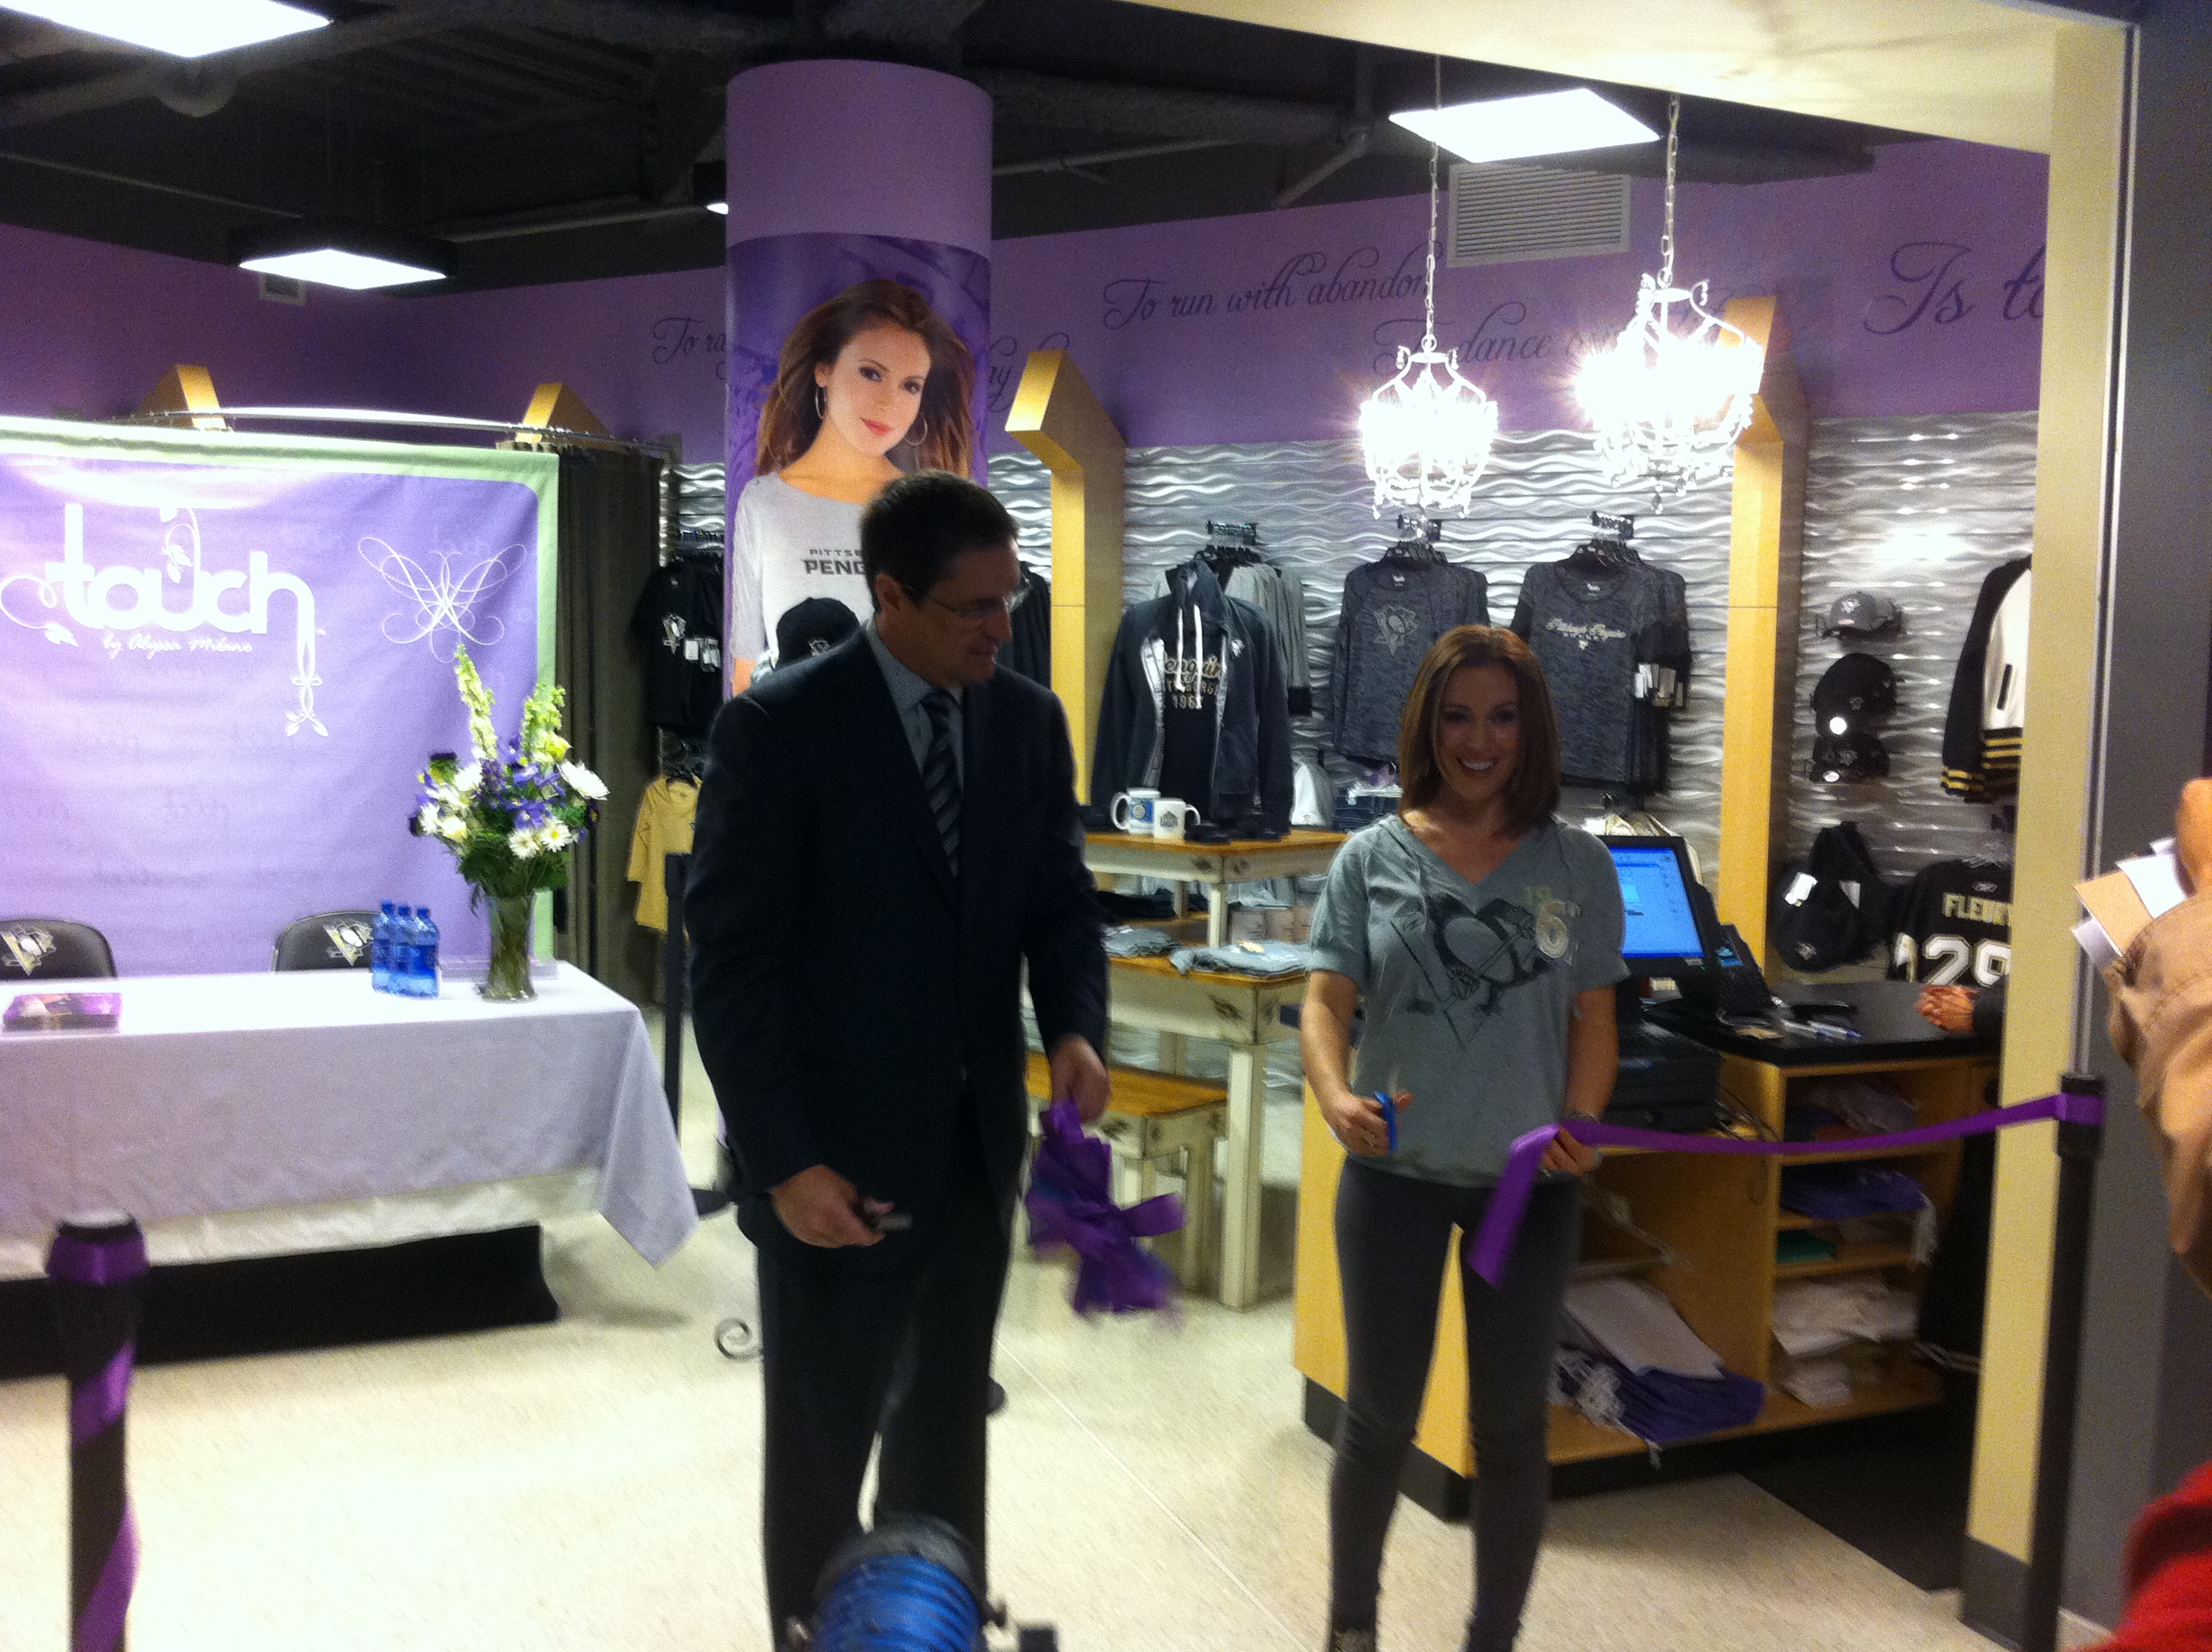 Alyssa Milano and G-III Apparel Launch New PensGear Store at the CONSOL Energy Center